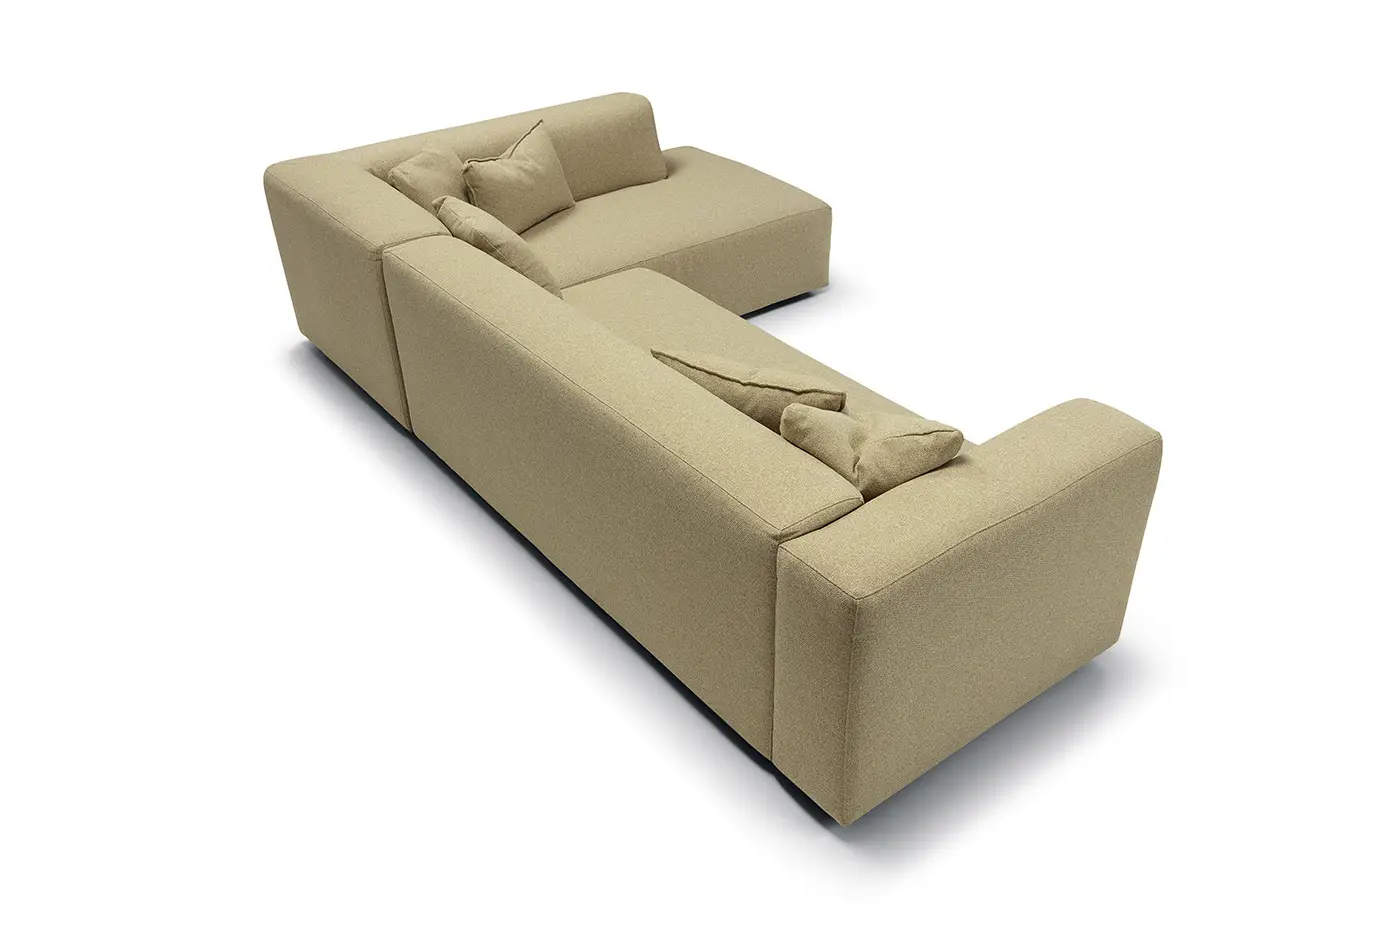 Milano furniture collection: details, SITS | dimensions, accessories